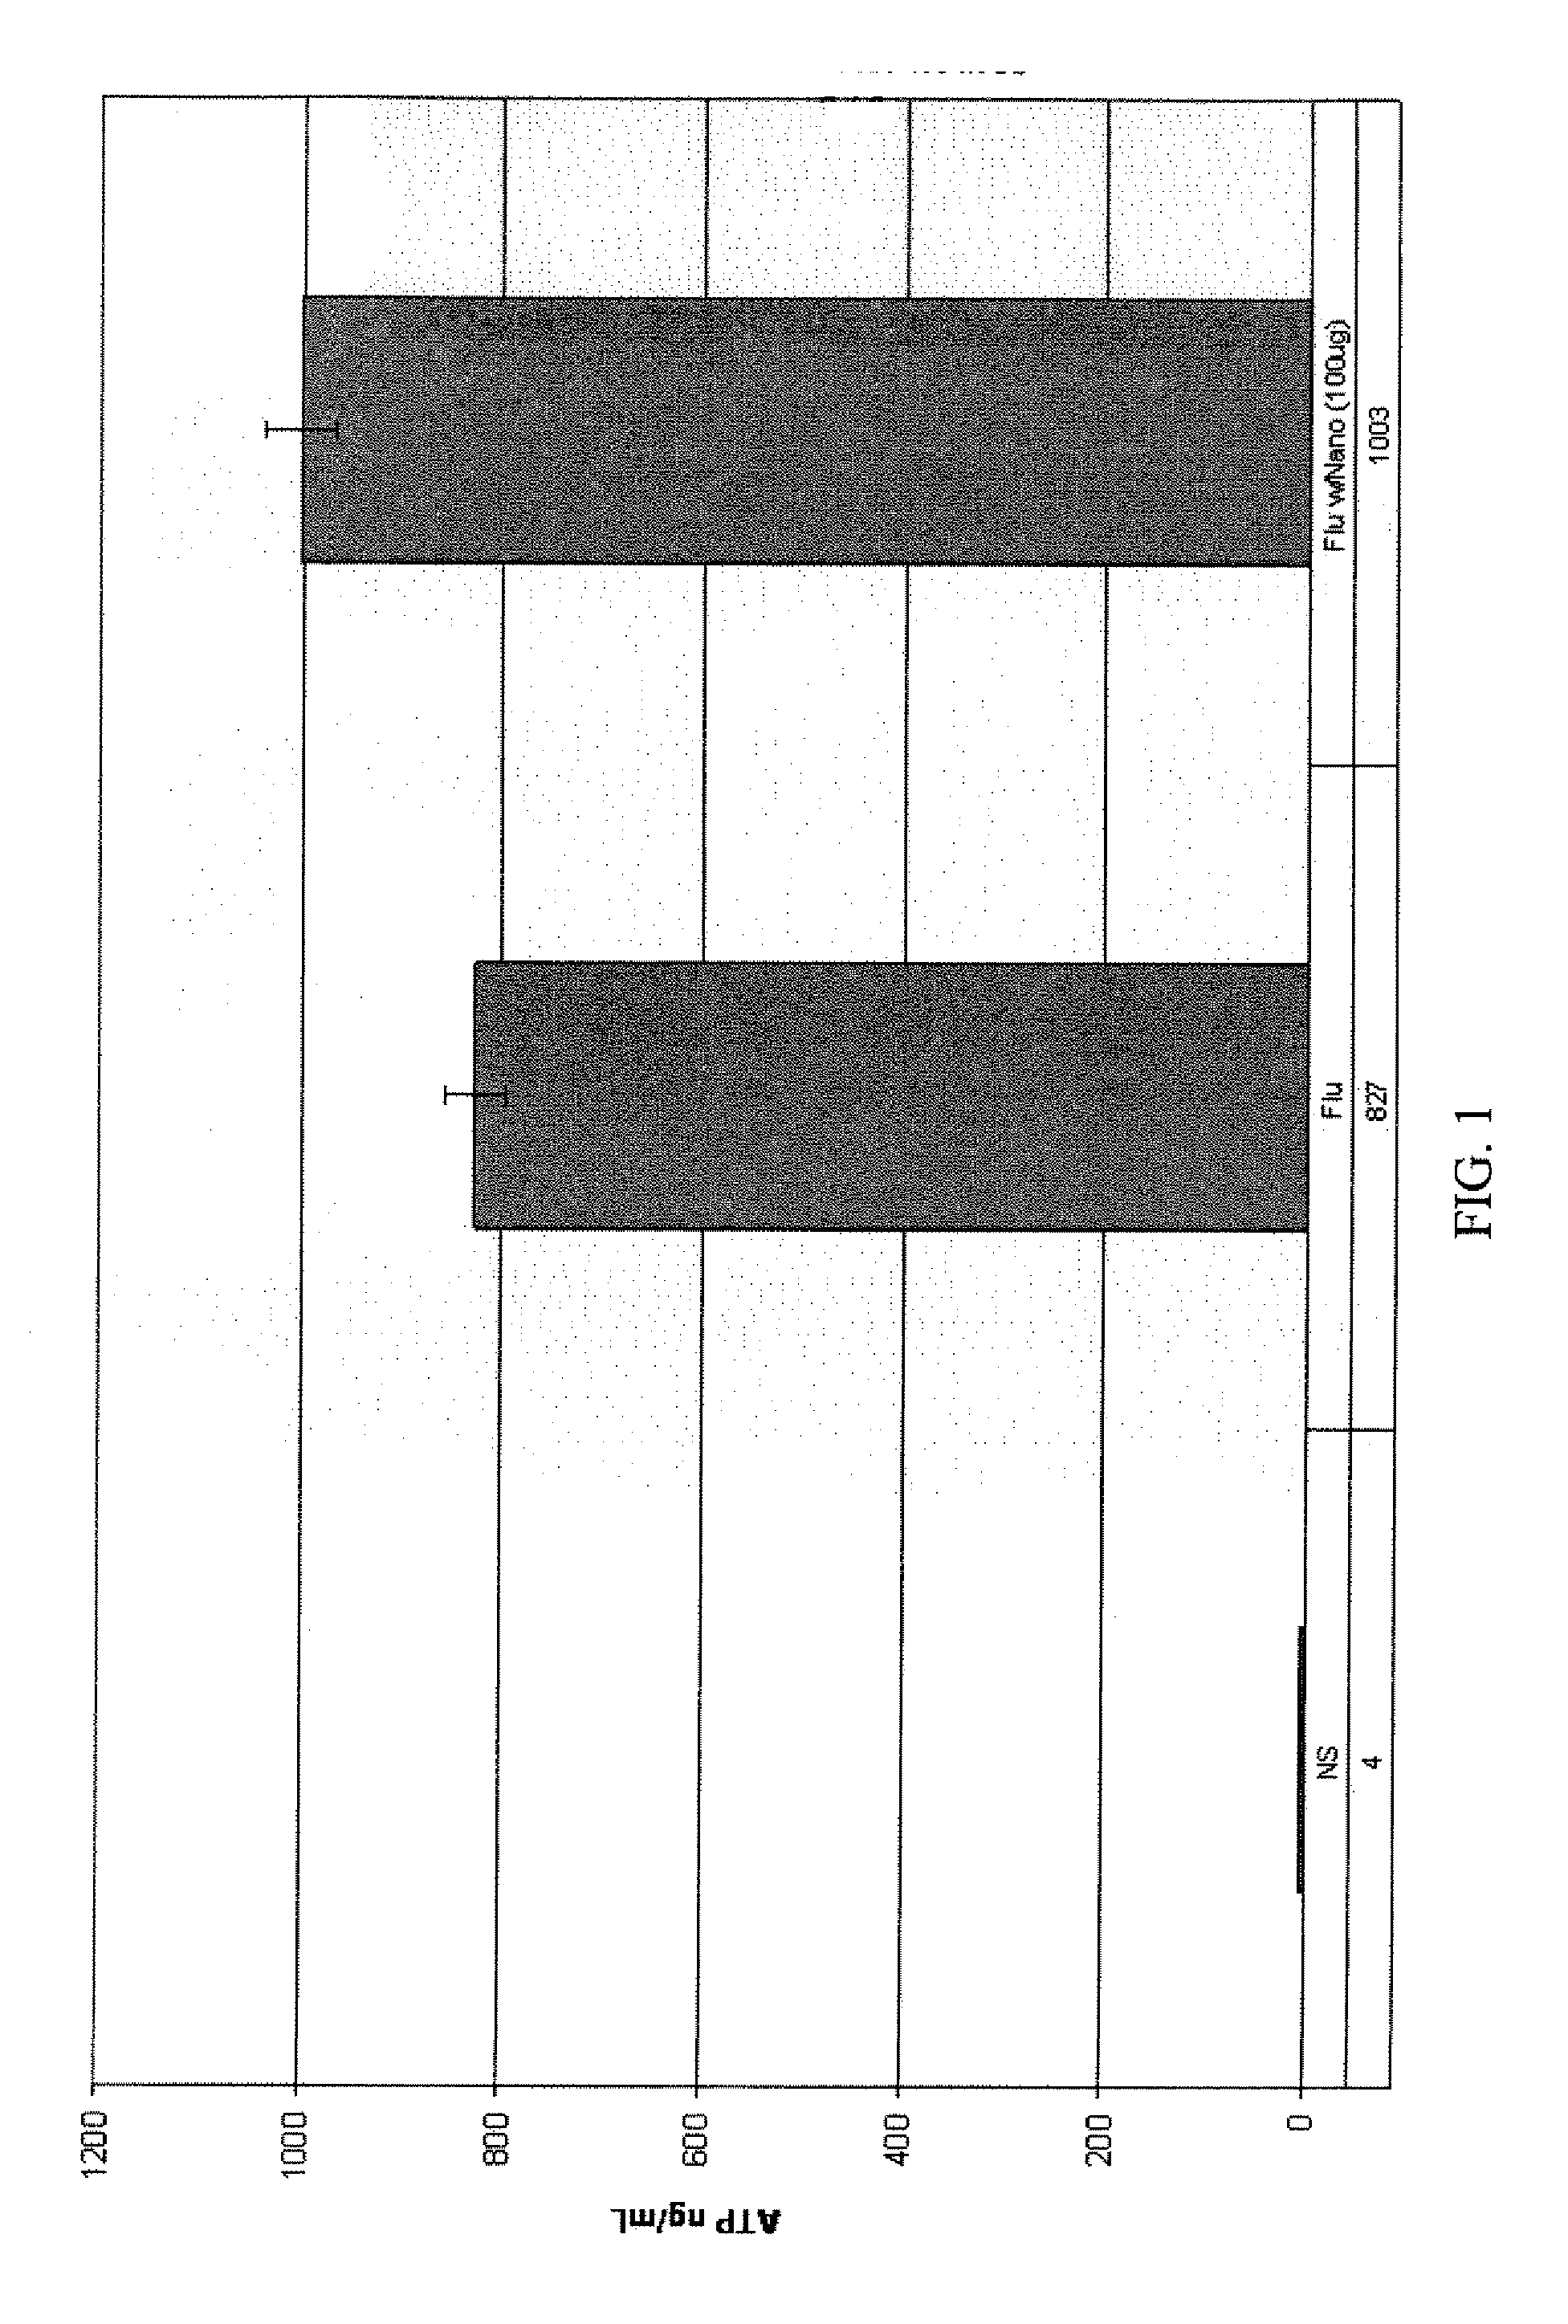 Nanofraction immune modulators, preparations and compositions including the same, and associated methods